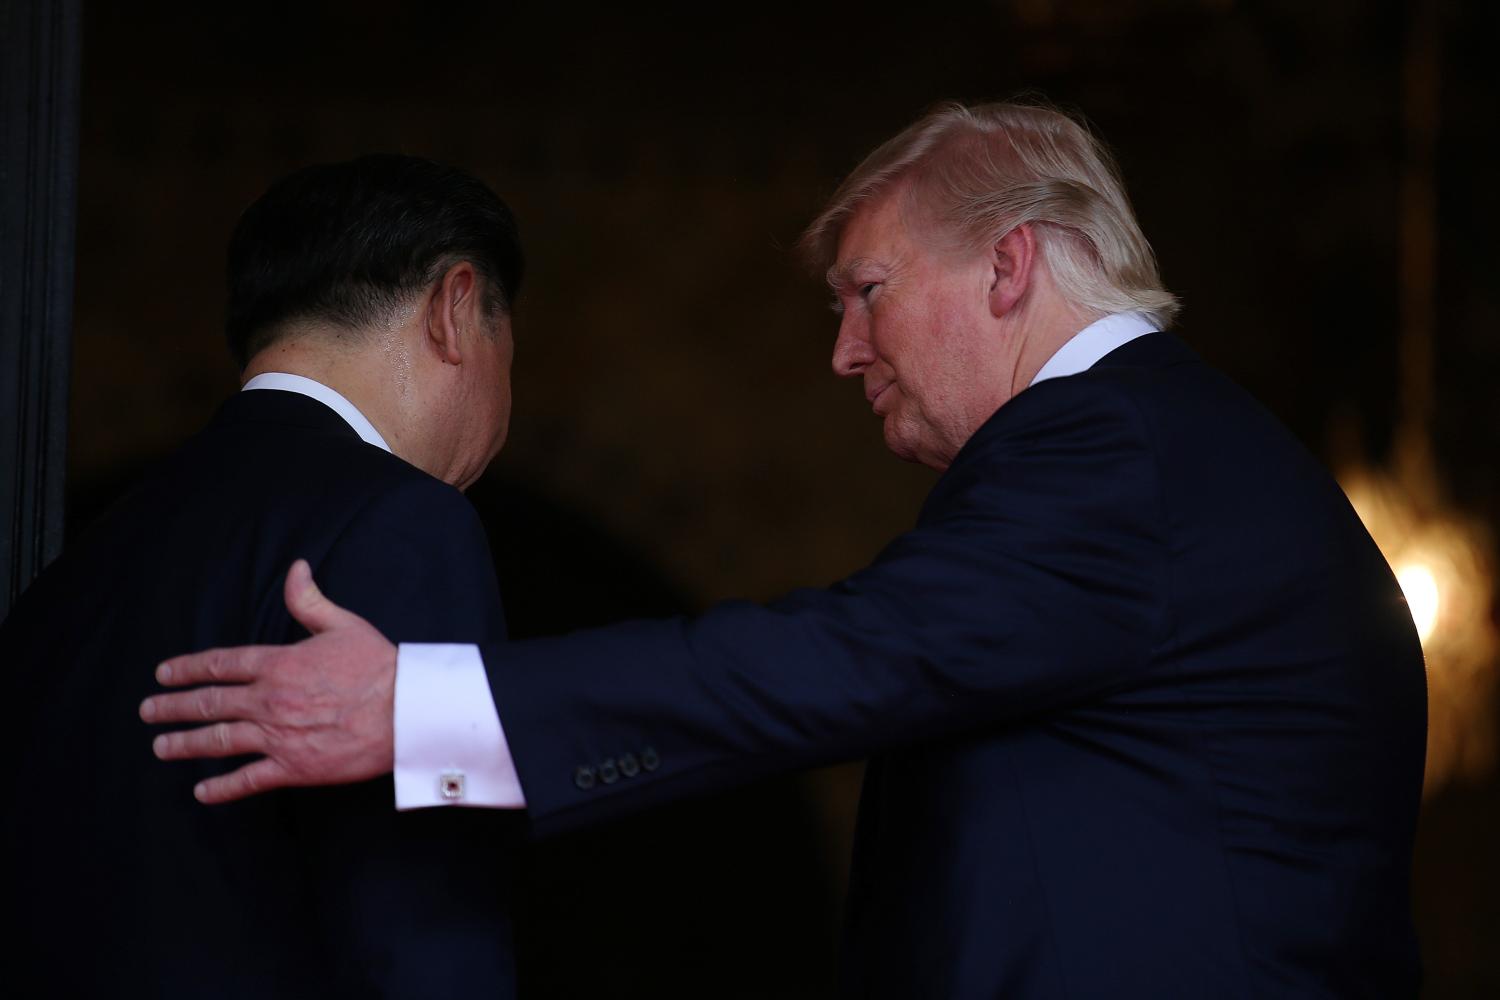 U.S. President Donald Trump welcomes Chinese President Xi Jinping at Mar-a-Lago state in Palm Beach, Florida, U.S., April 6, 2017.  REUTERS/Carlos Barria - RC1510574D80